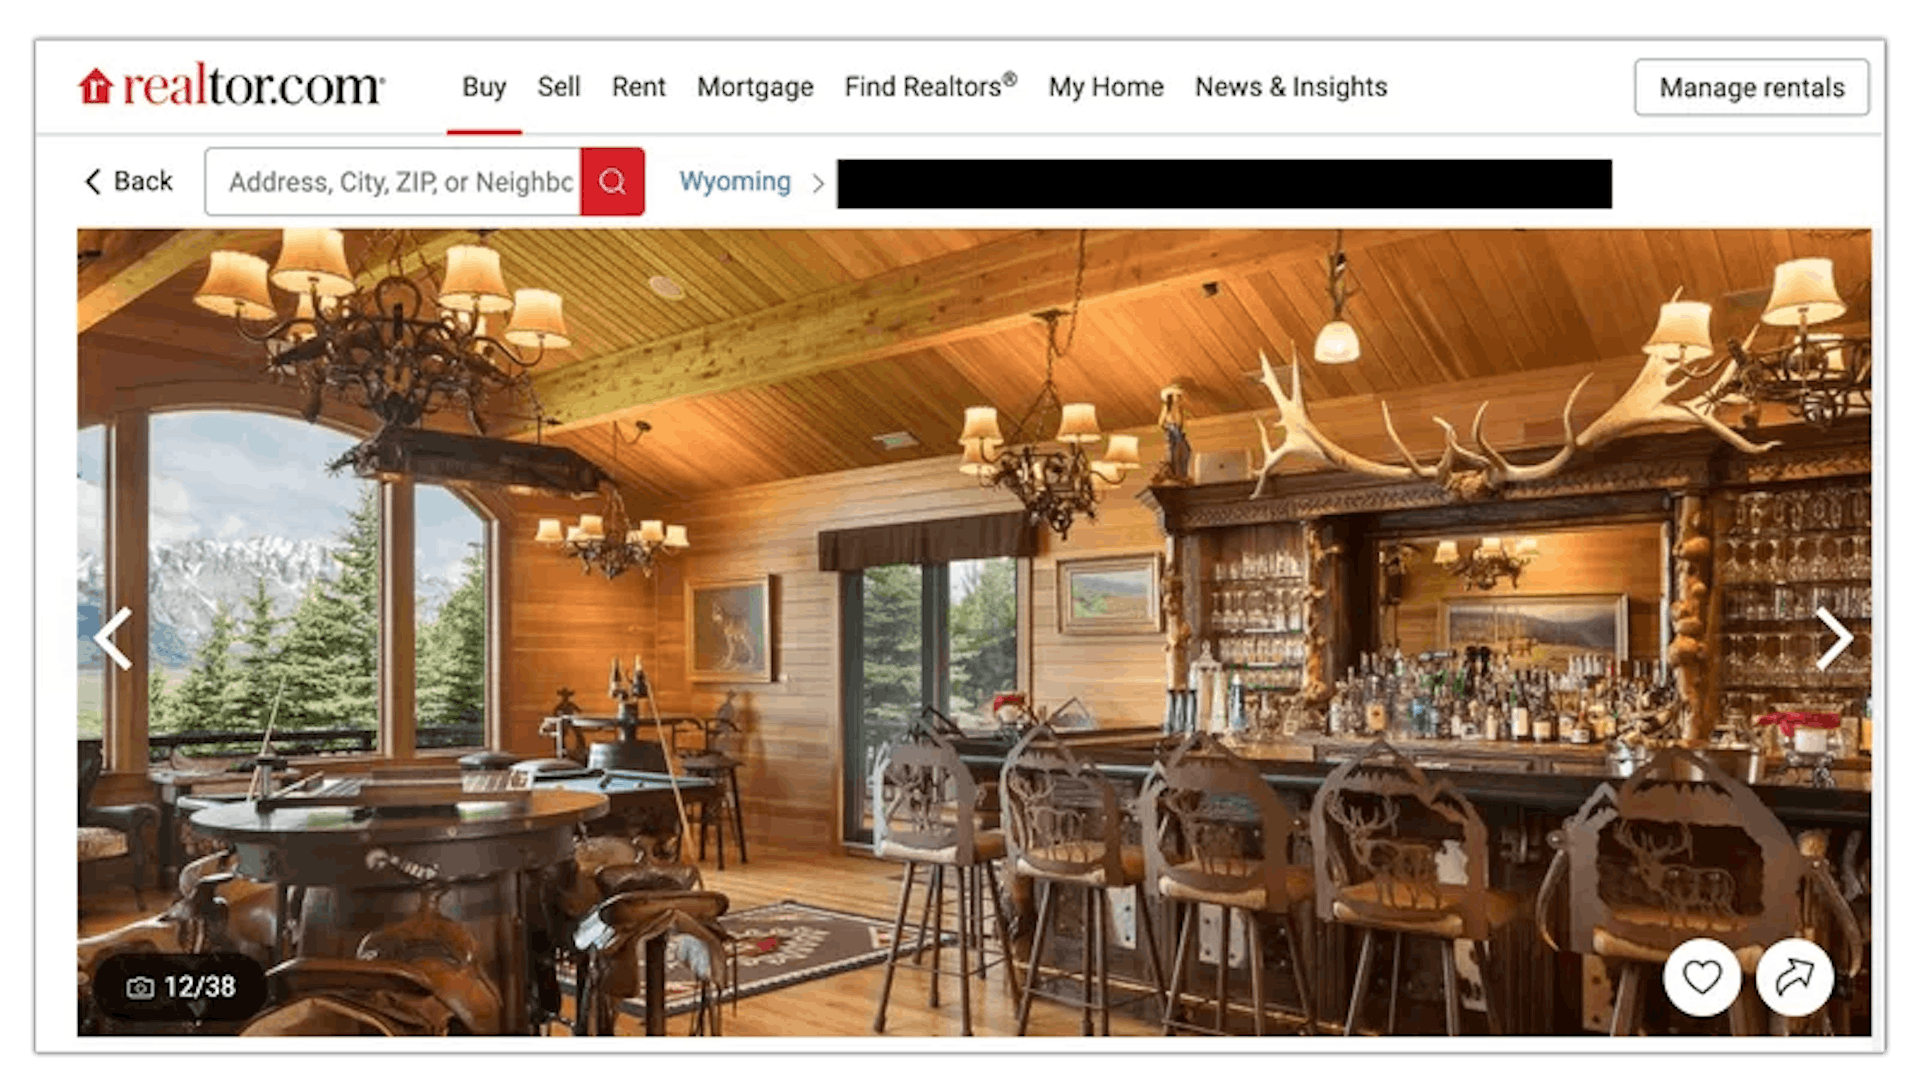 Sokol’s ranch outside Jackson Hole, Wyoming, which he sold in 2020, is a sprawling, 9,000-square foot estate in the foothills of Shadow Mountain, designed like a lodge. Credit: Realtor Website. Personal information redacted by ProPublica.